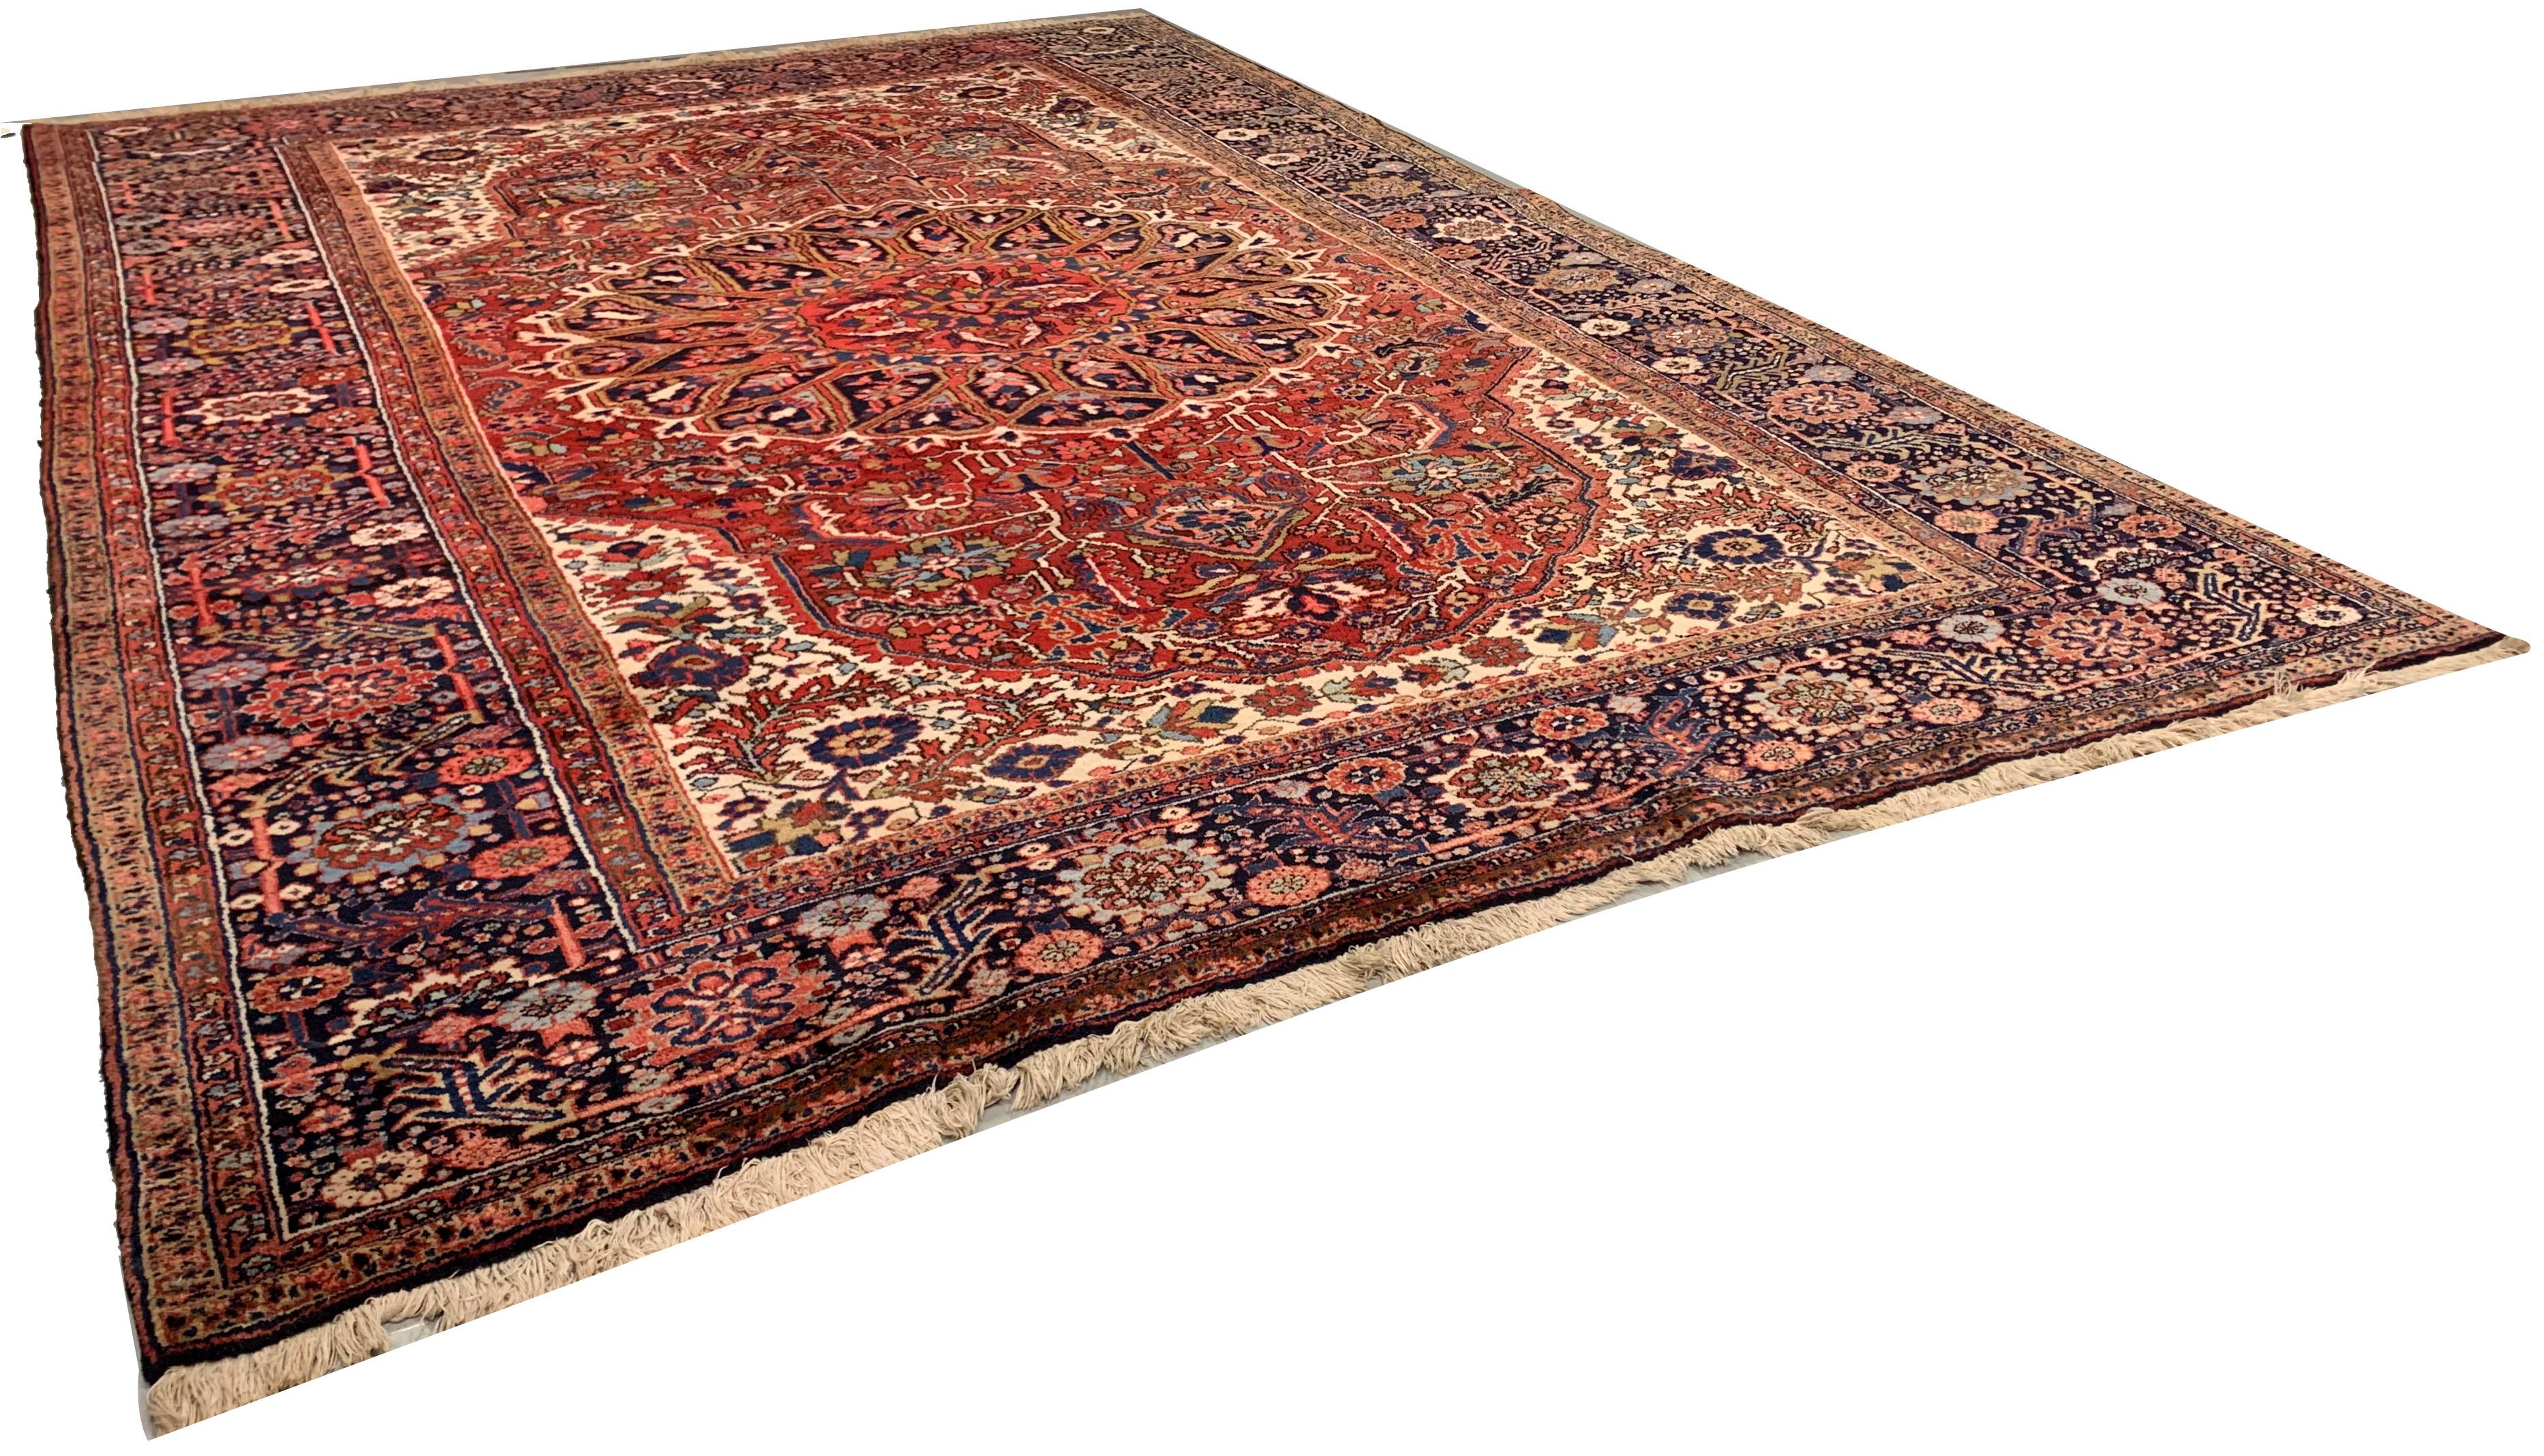 Vintage Persian Heriz Area rug, 8'2 x 12'. As perpetually fashionable as they are collectible, traditional Heriz rugs are skillfully woven in vibrant colors and emphatic geometric designs. The Heriz district of NW Persia has been weaving carpets for